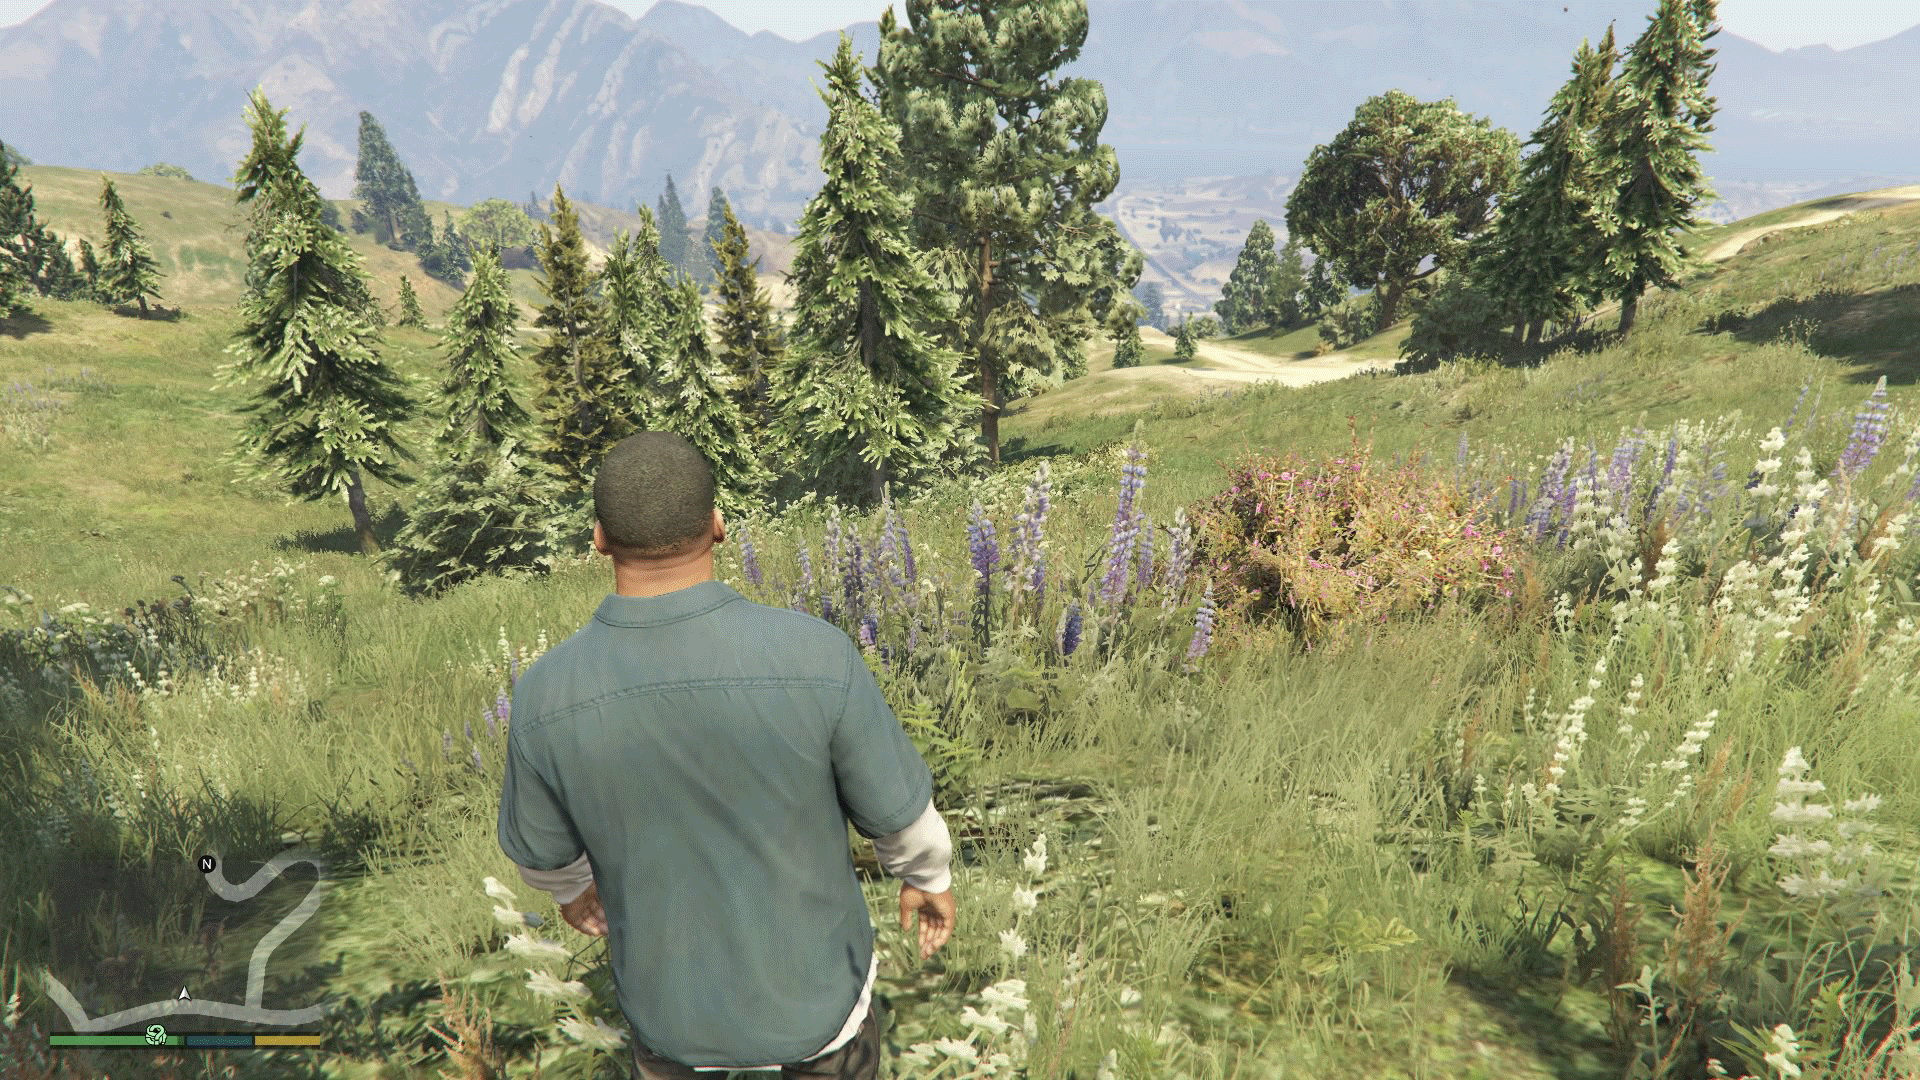 GTA 5' Has Way More Foliage On PS4 Than Xbox One